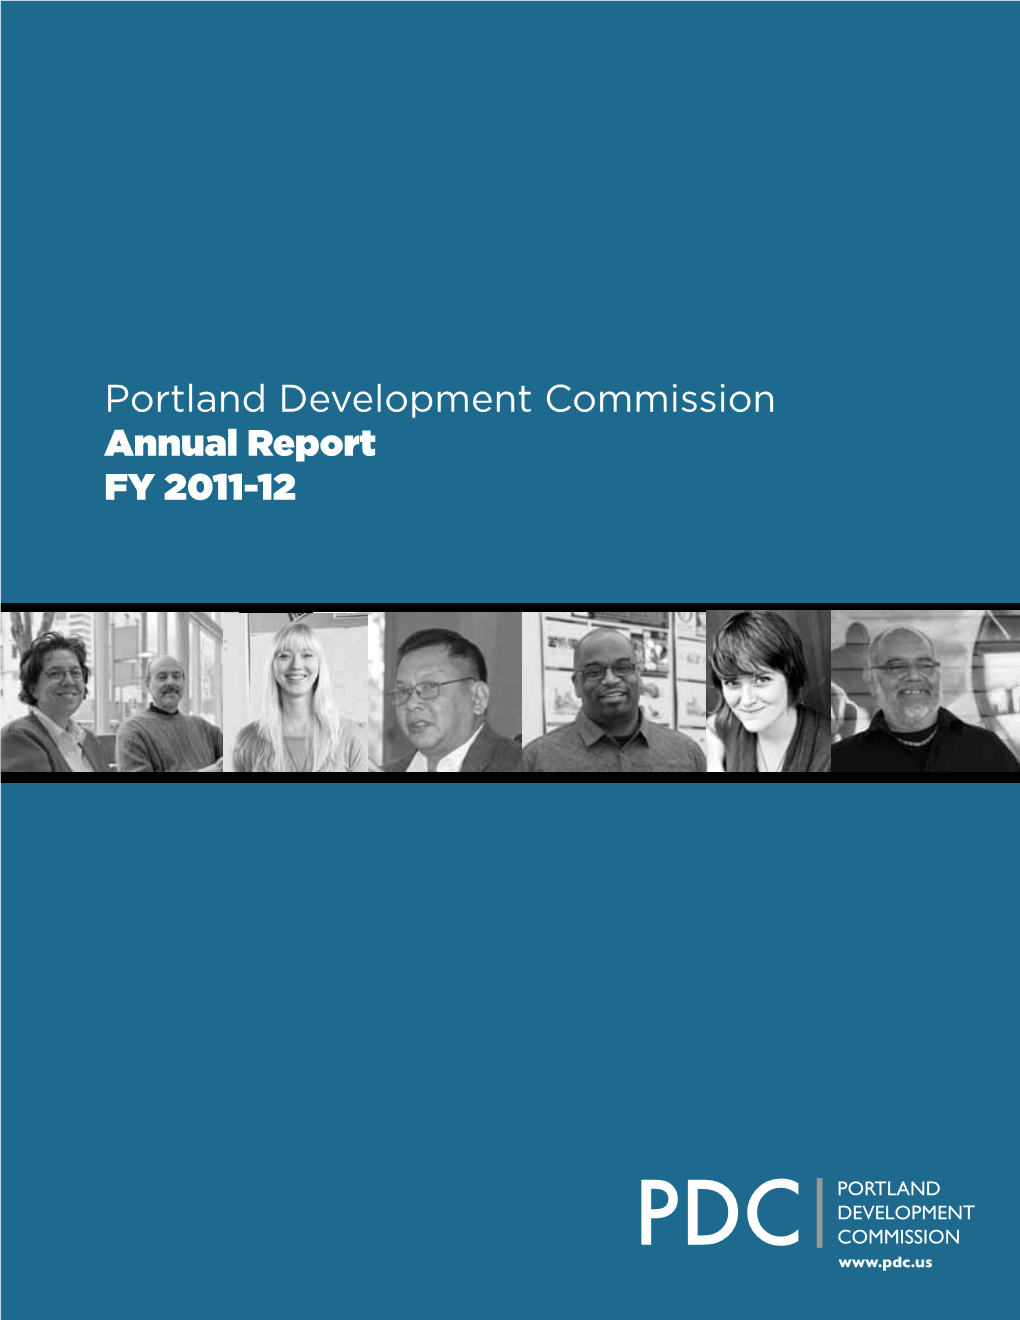 PDC Annual Report FY 2011-12